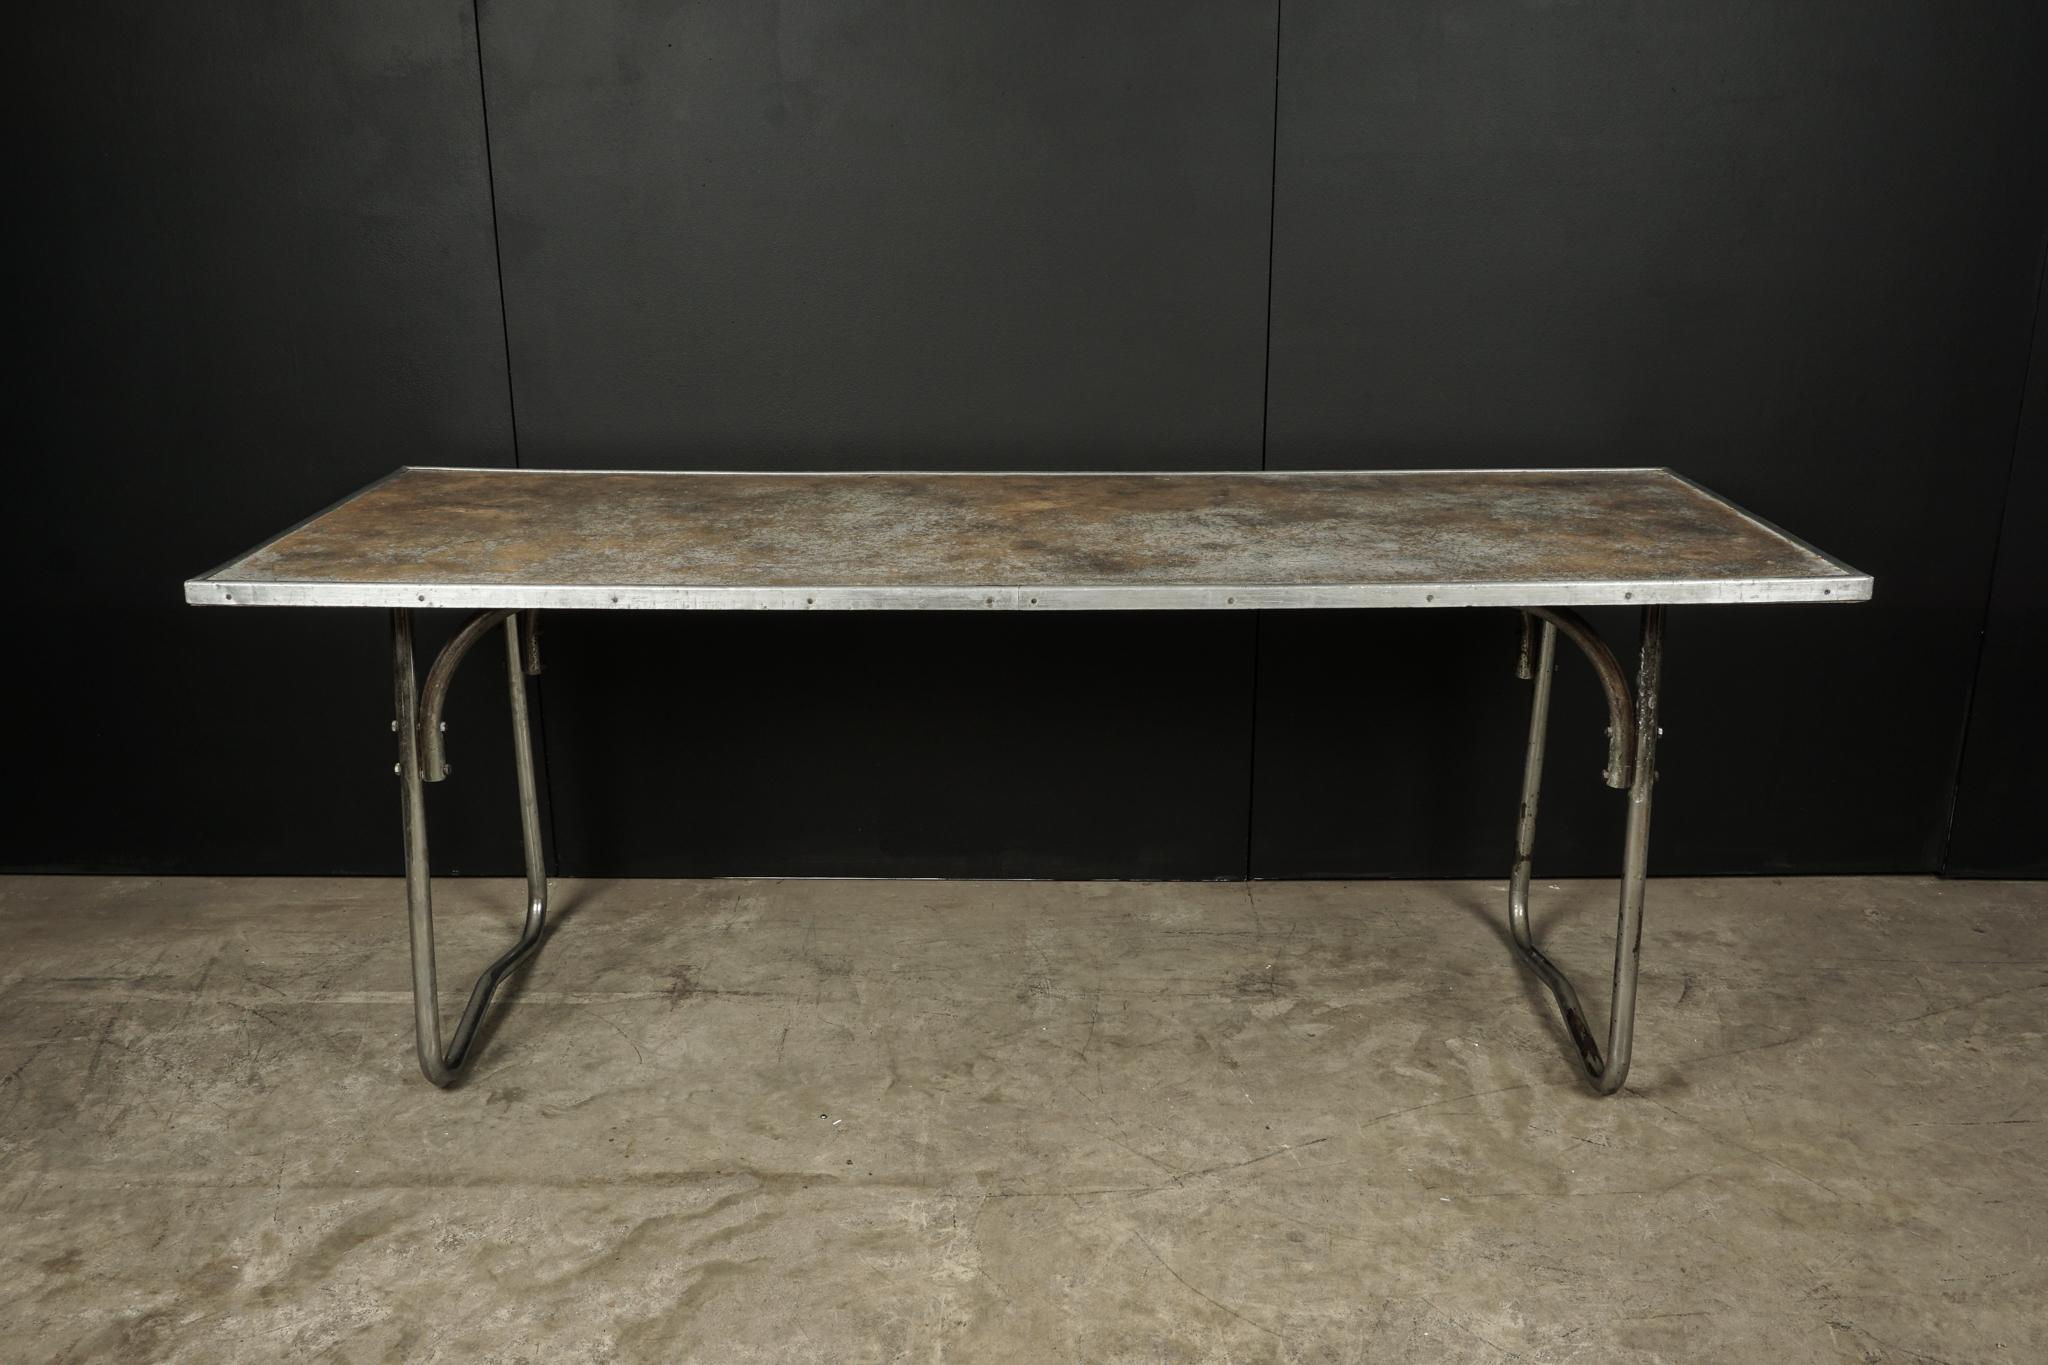 Midcentury dining table from France, circa 1960. Chrome base with a sort of nickel finish. Very nice patina on the top.